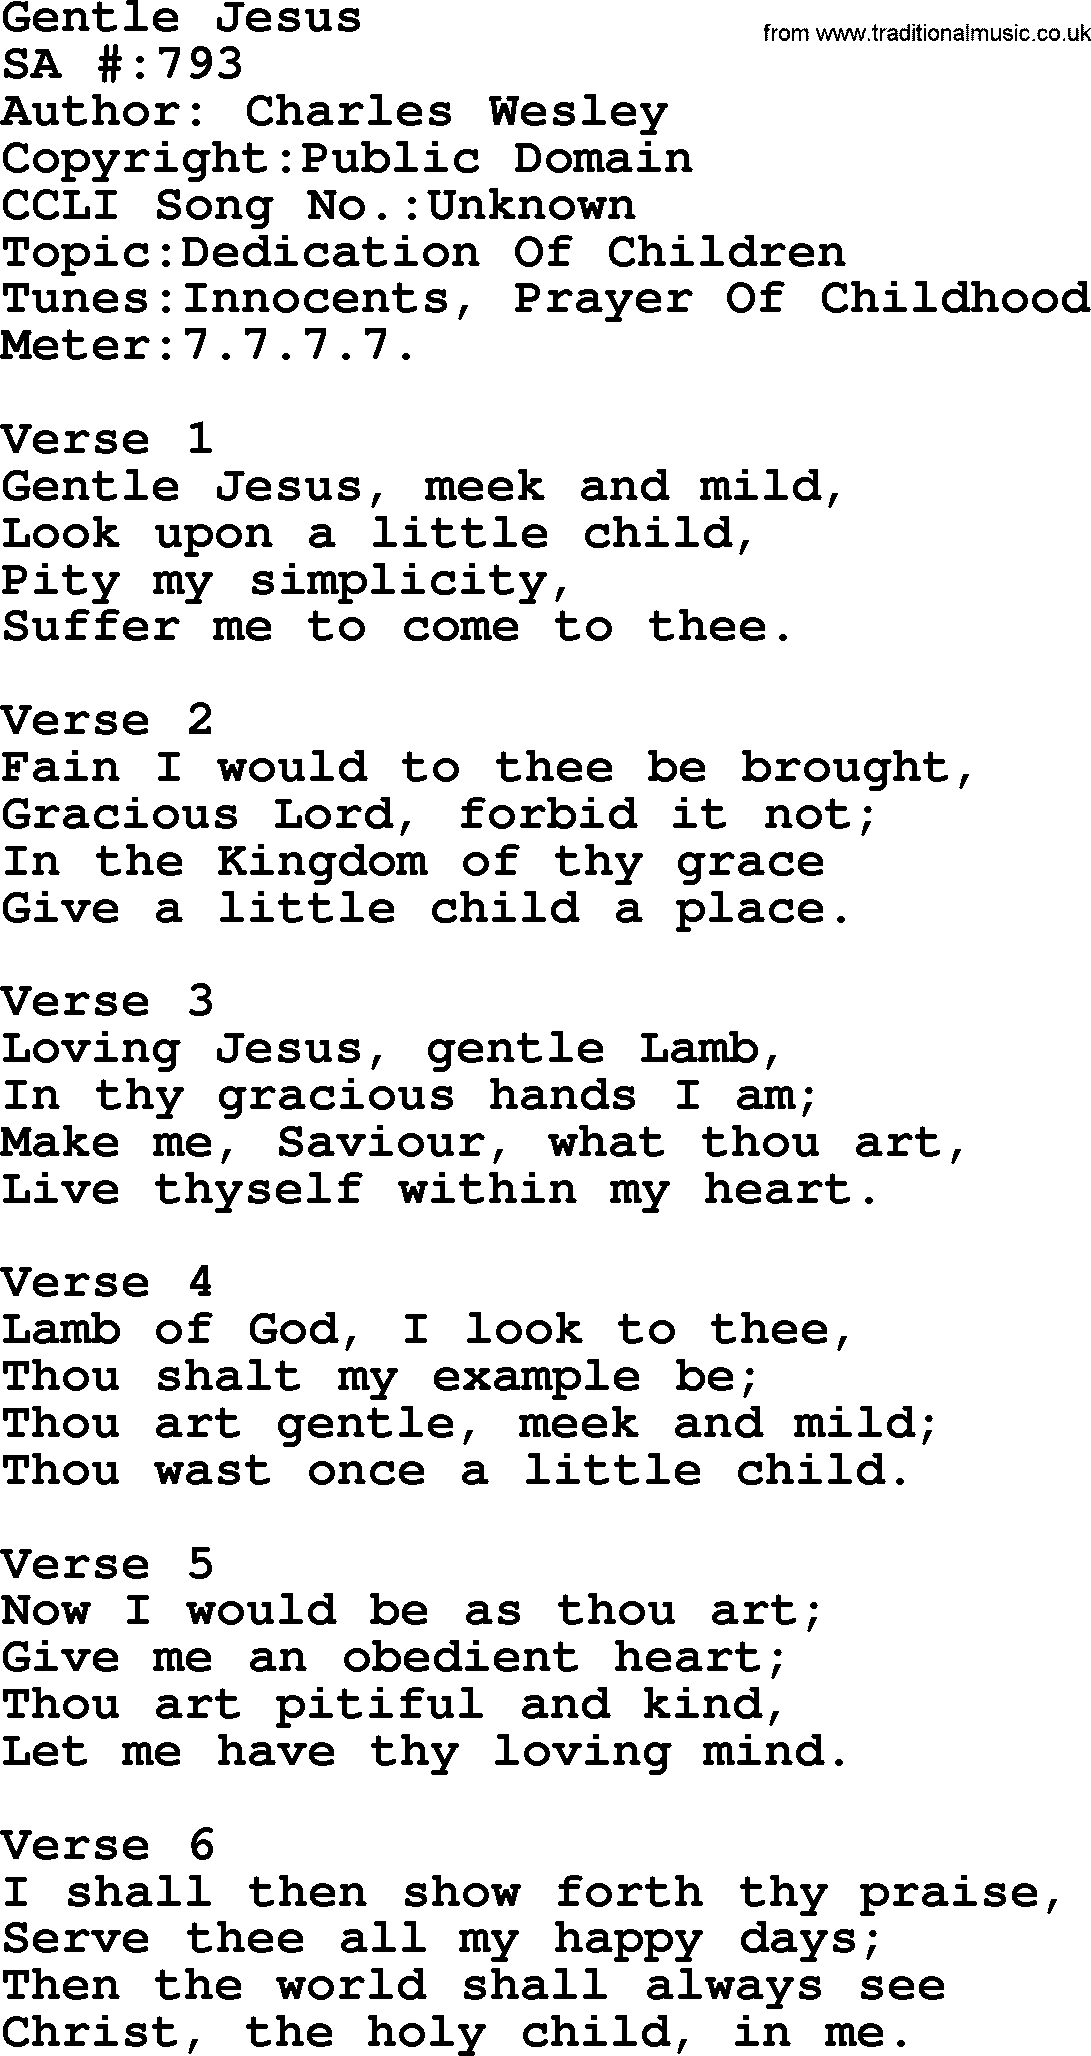 Salvation Army Hymnal, title: Gentle Jesus, with lyrics and PDF,